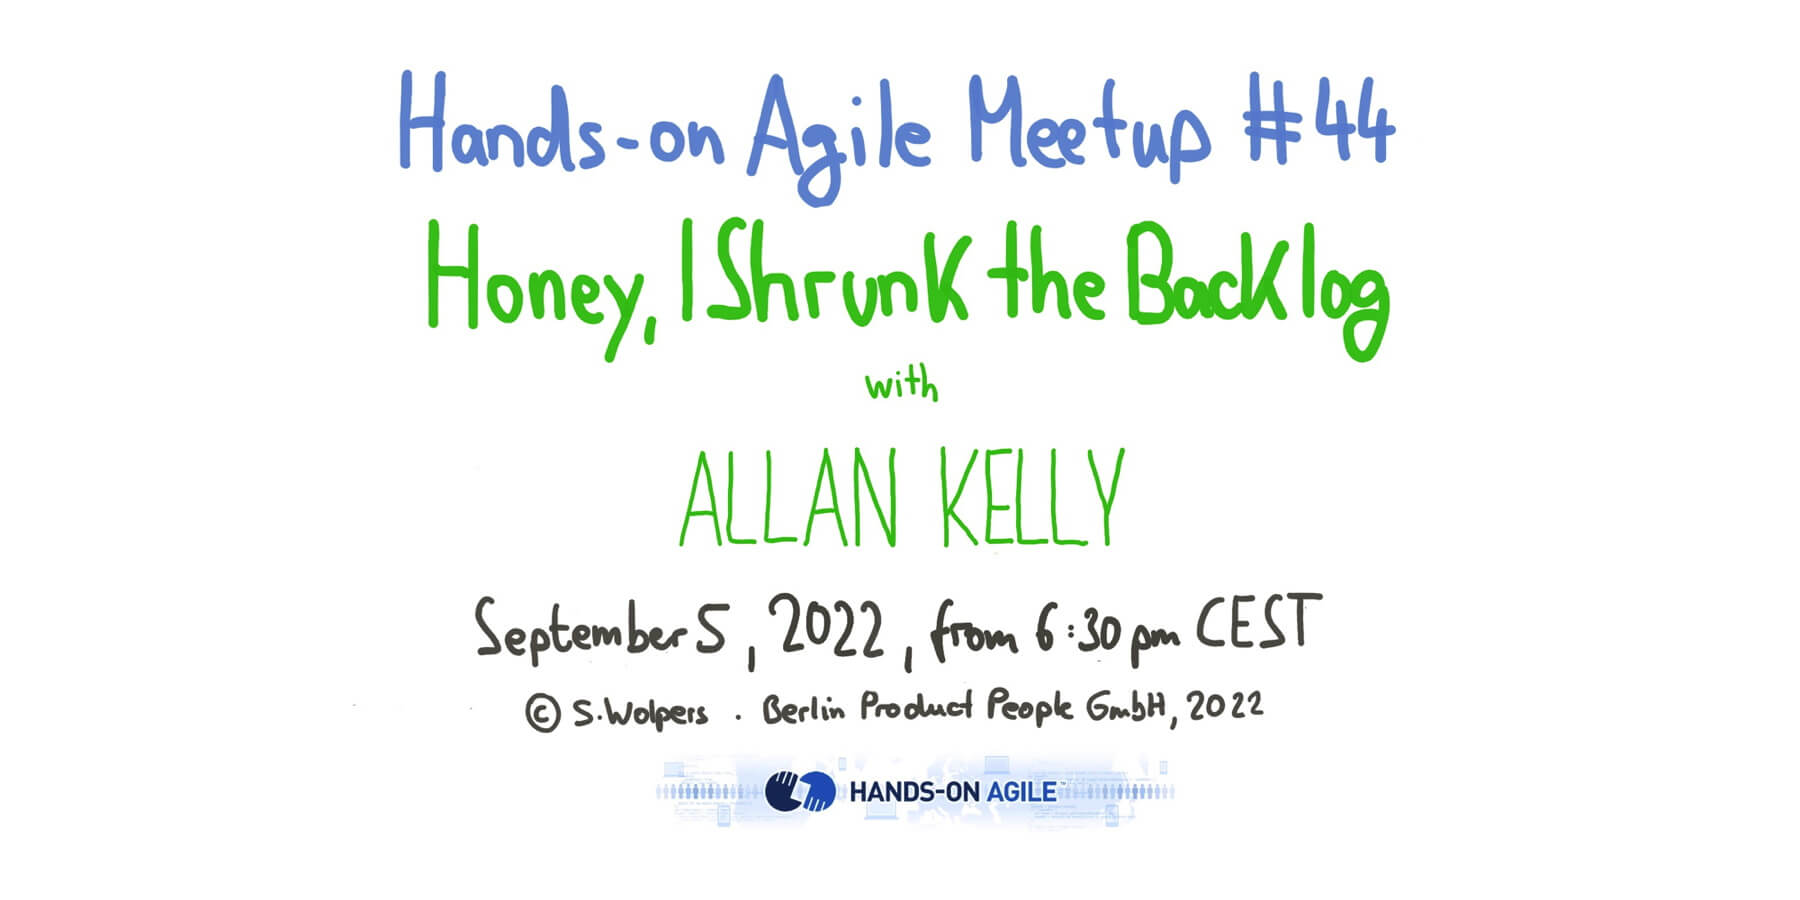 Hands-on Agile #44: Honey, I Shrunk the Backlog with Allan Kelly — Berlin Product People GmbH